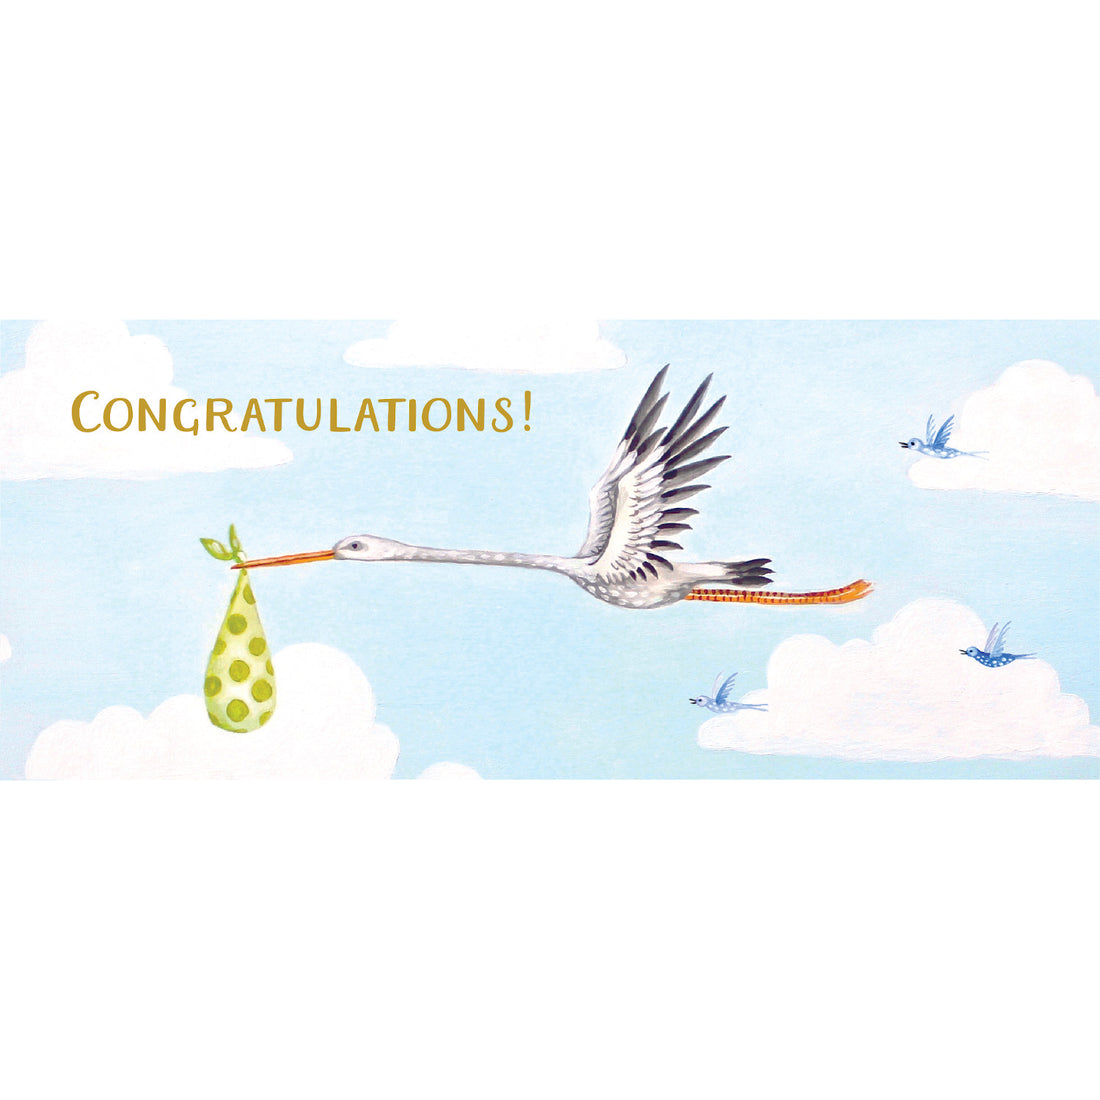 A whimsical illustration of a white stork flying through a cloudy blue sky with a spotted green bundle hanging from their beak, with &quot;CONGRATULATIONS!&quot; printed in gold above the bird.